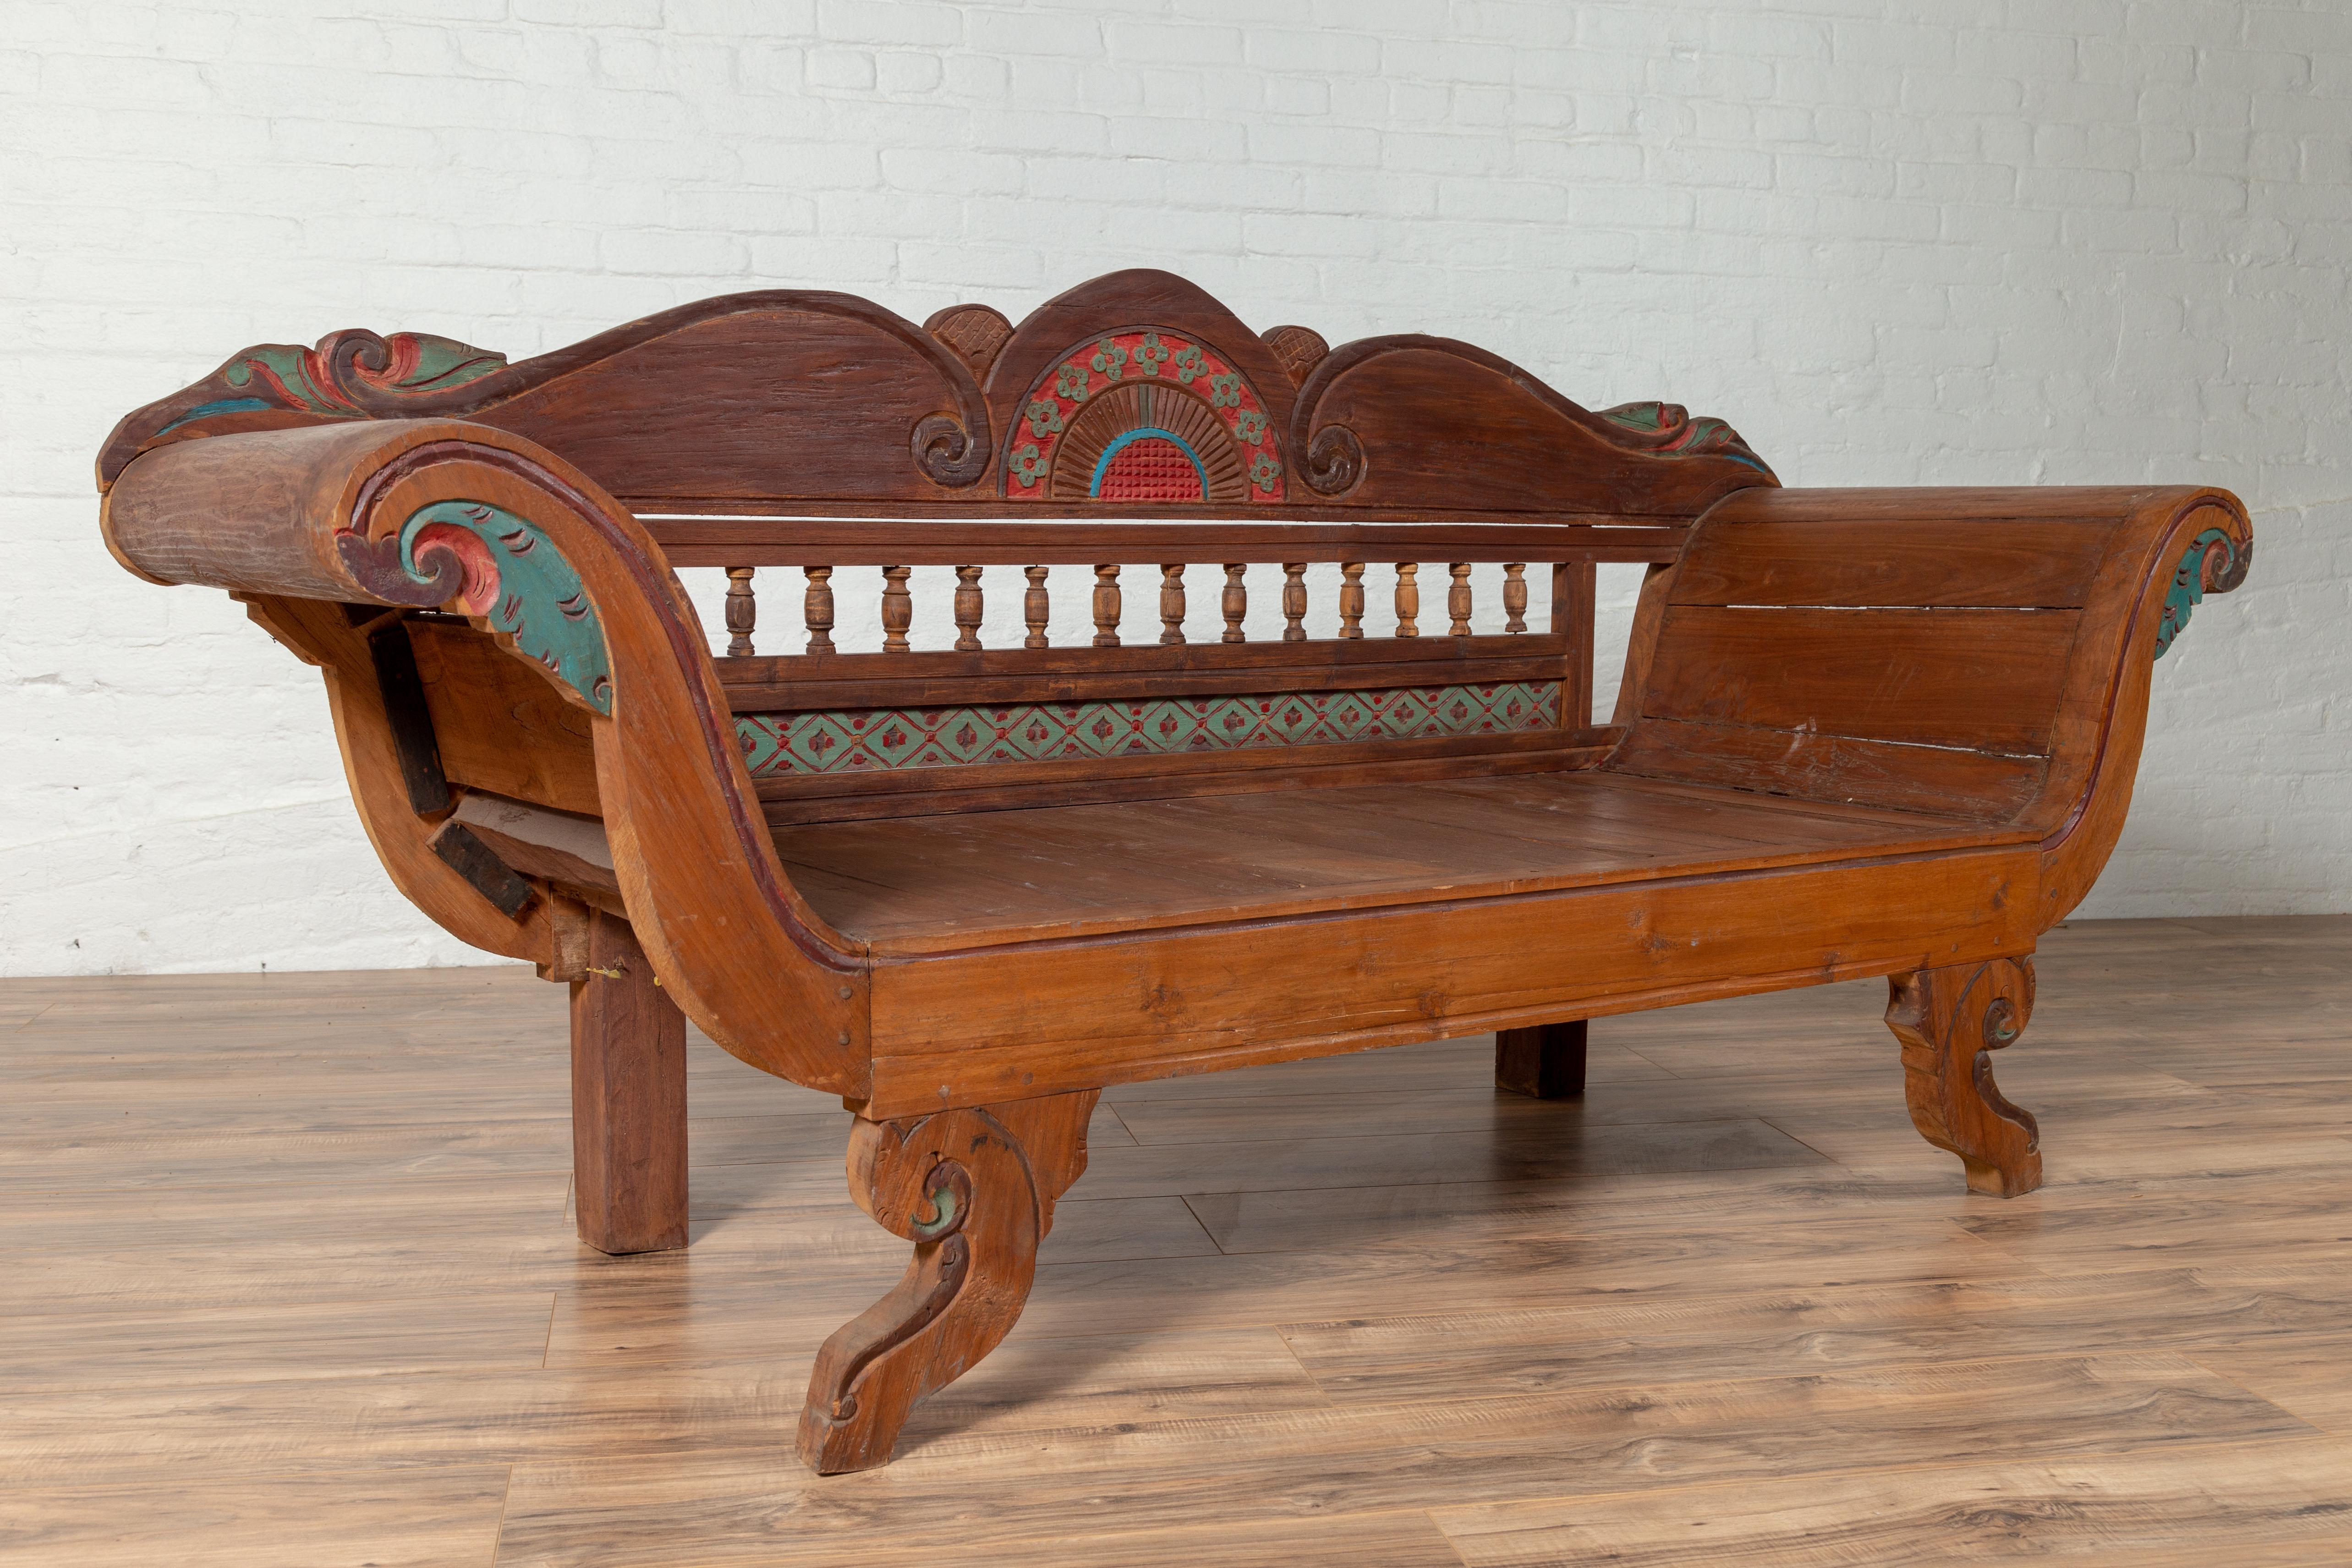 Plantation Javanese Teak Settee with Polychrome Décor and Out-Scrolling Arms For Sale 6